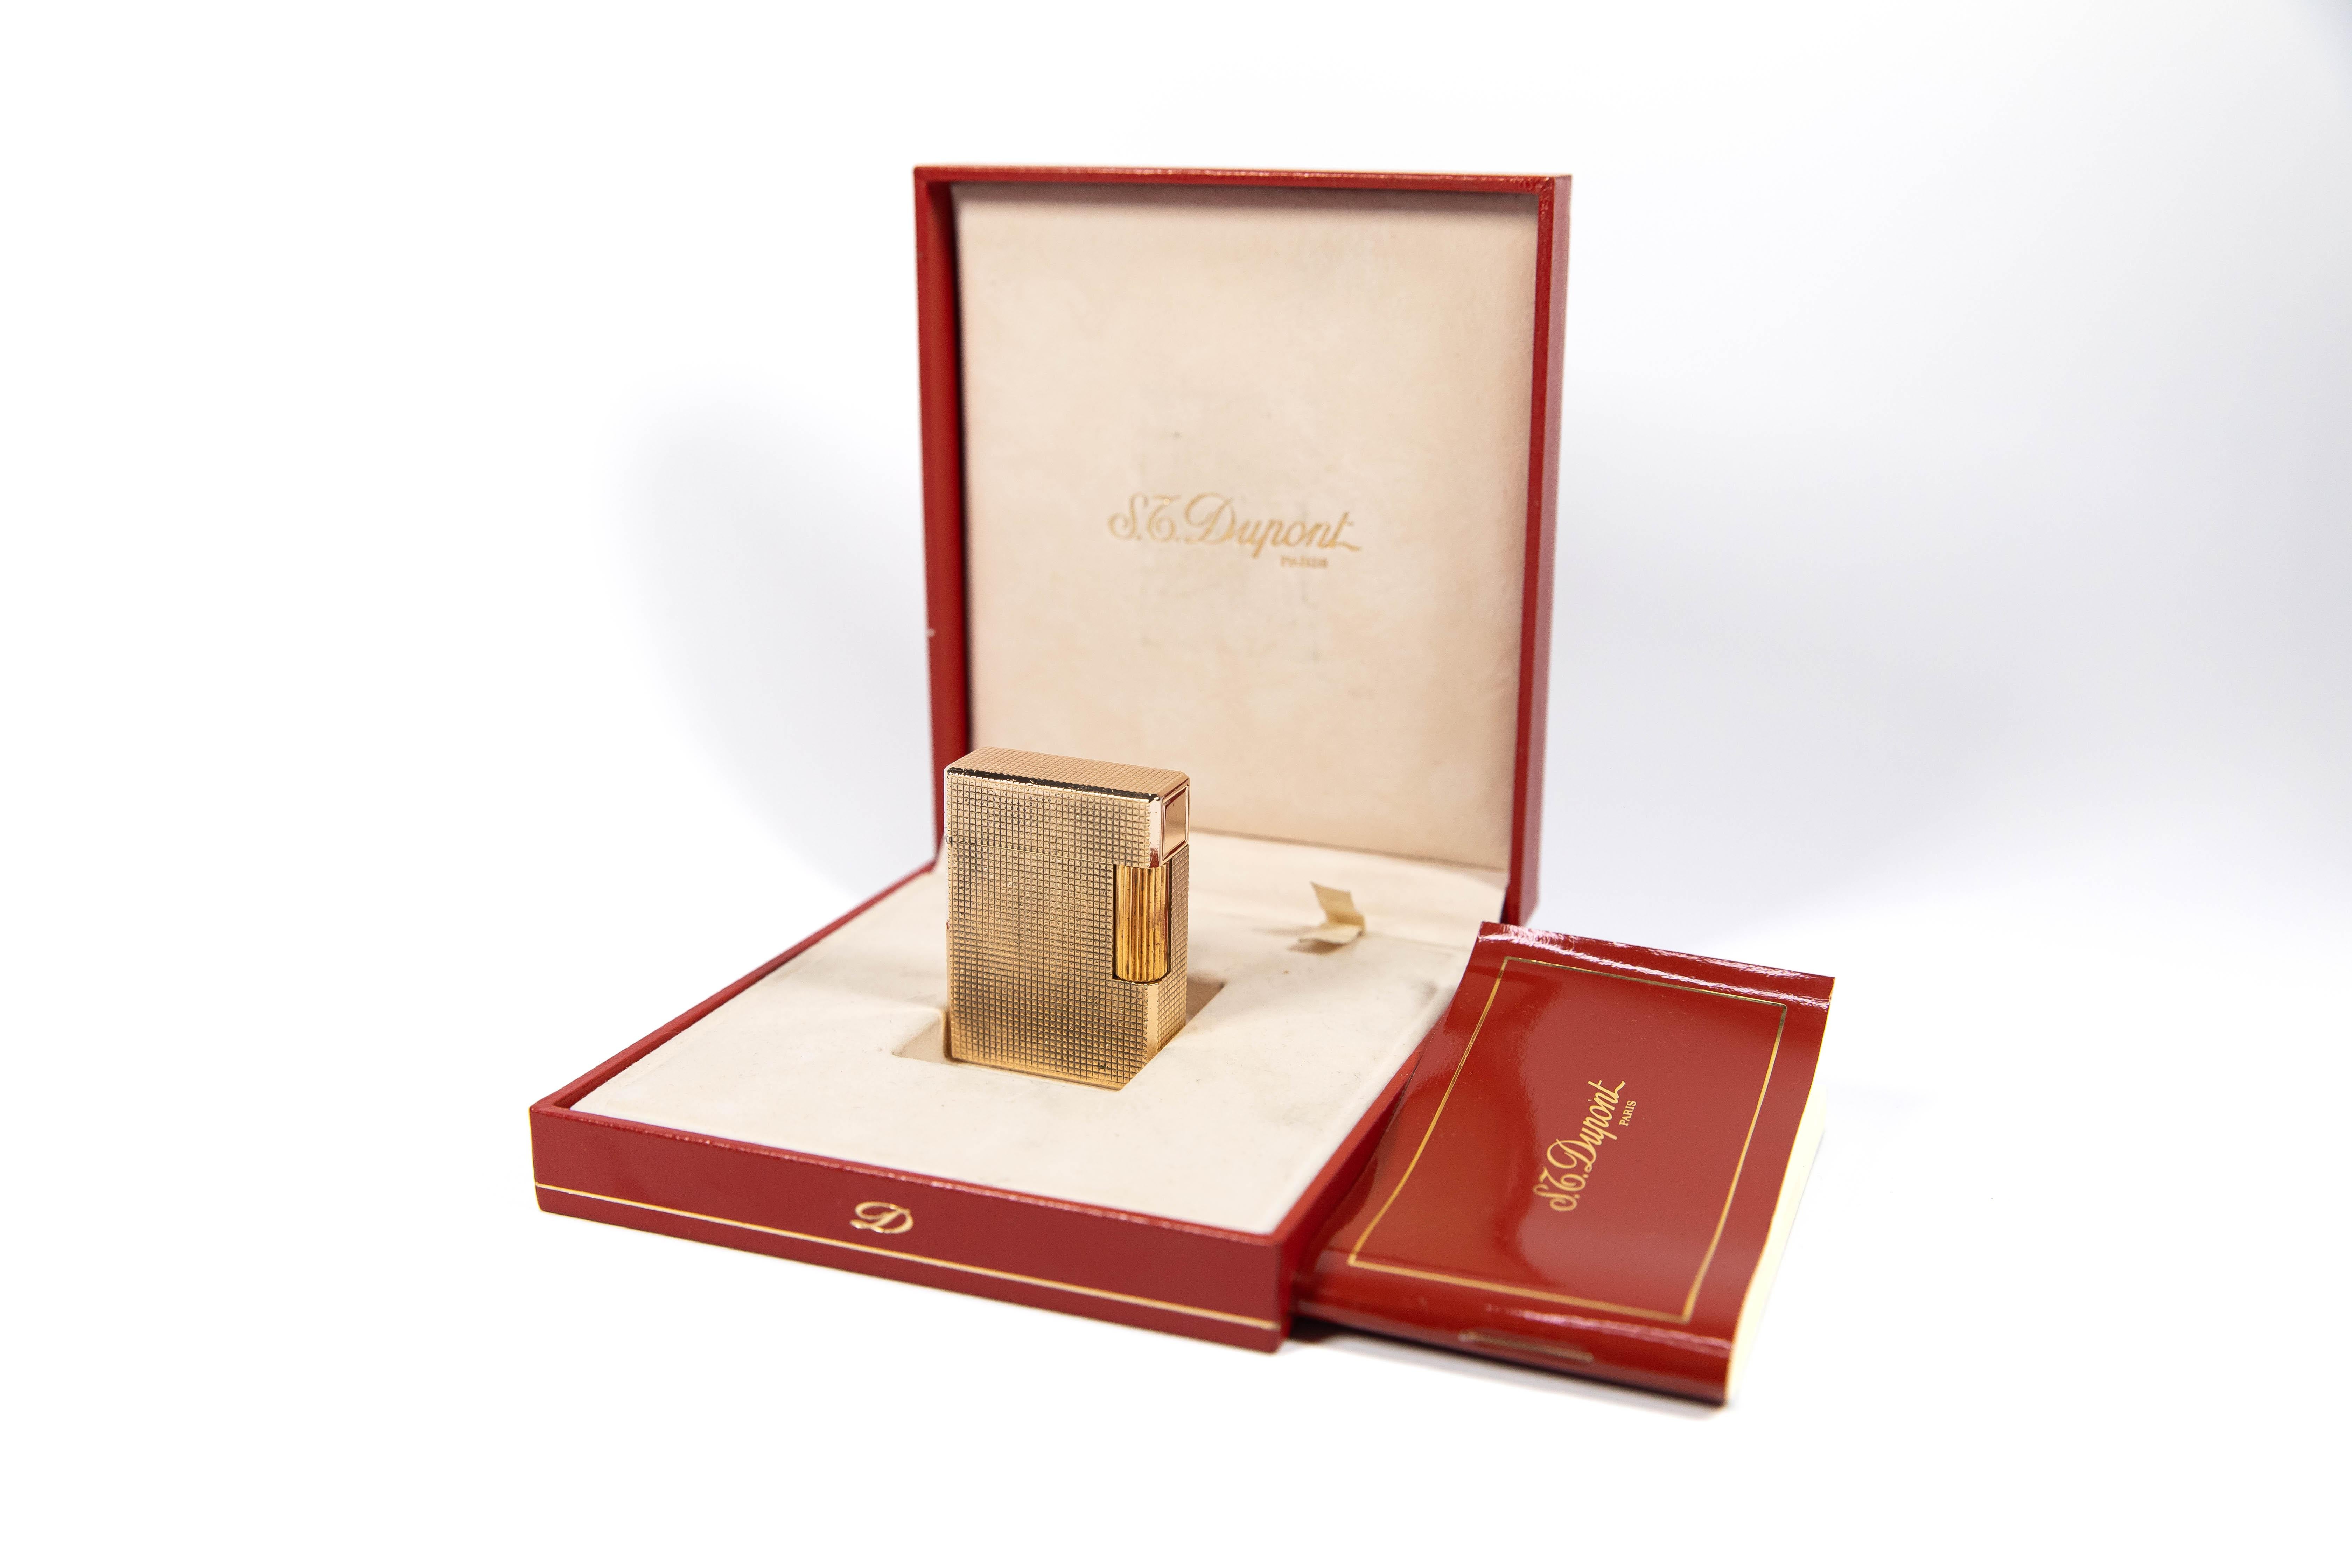 Vintage Gold Plated Ligne 1 BR ST Dupont Lighter

The iconic S.T. Dupont name is known for quality, well-made cigarette lighters and other luxury implements. The company’s origin can be traced to Simon Tissot-Dupont opening his workshop shop in